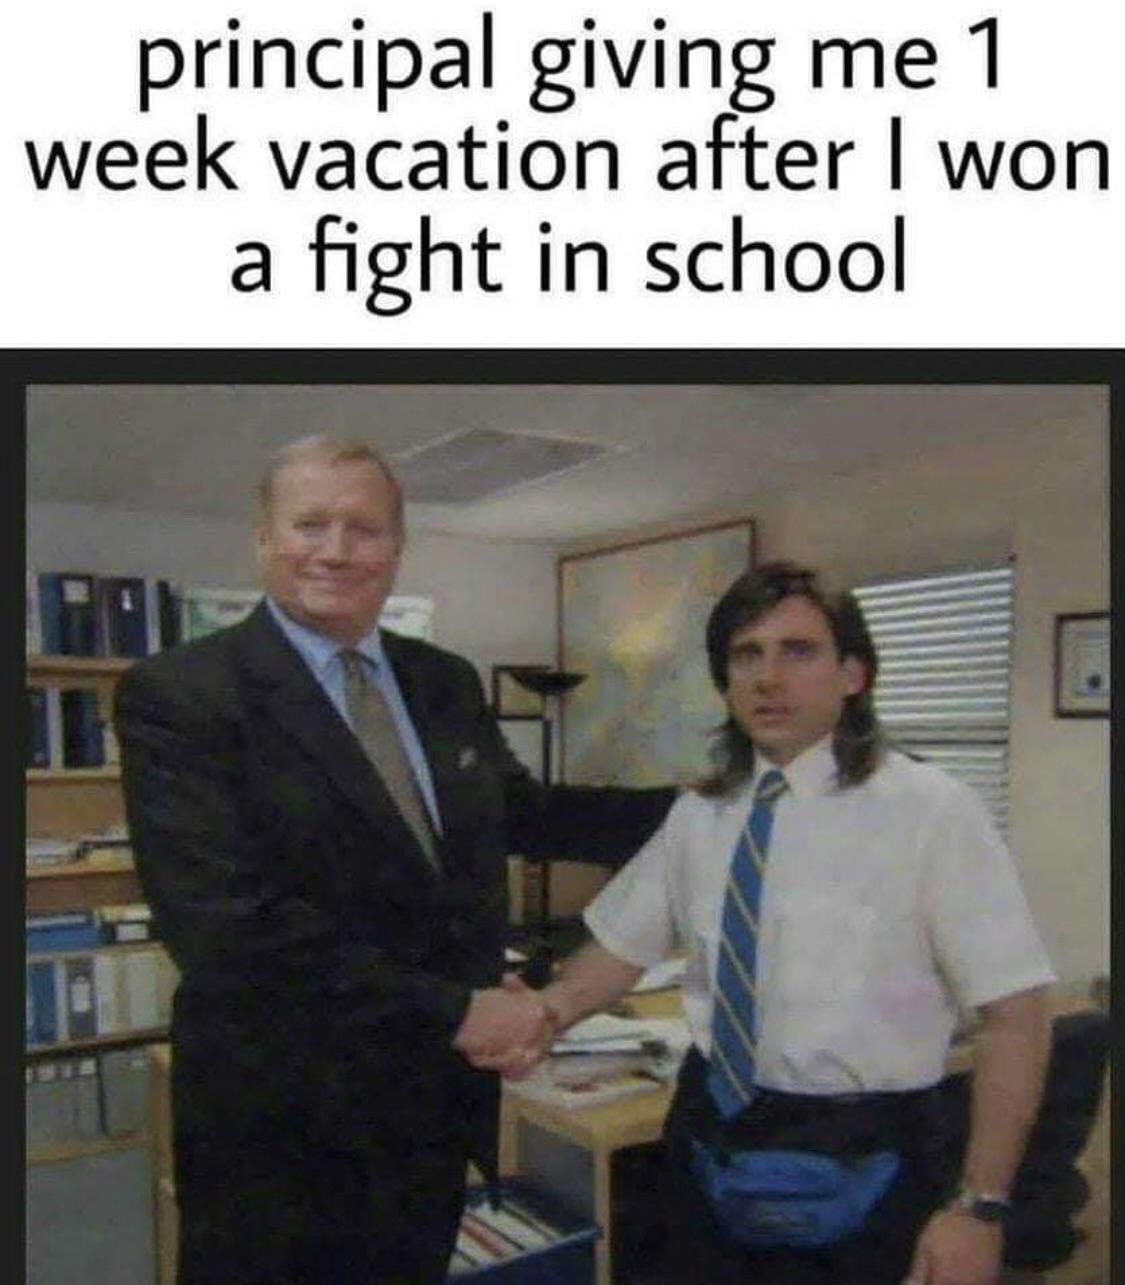 funny memes - dank memes - michael scott ed truck - principal giving me 1 week vacation after I won a fight in school